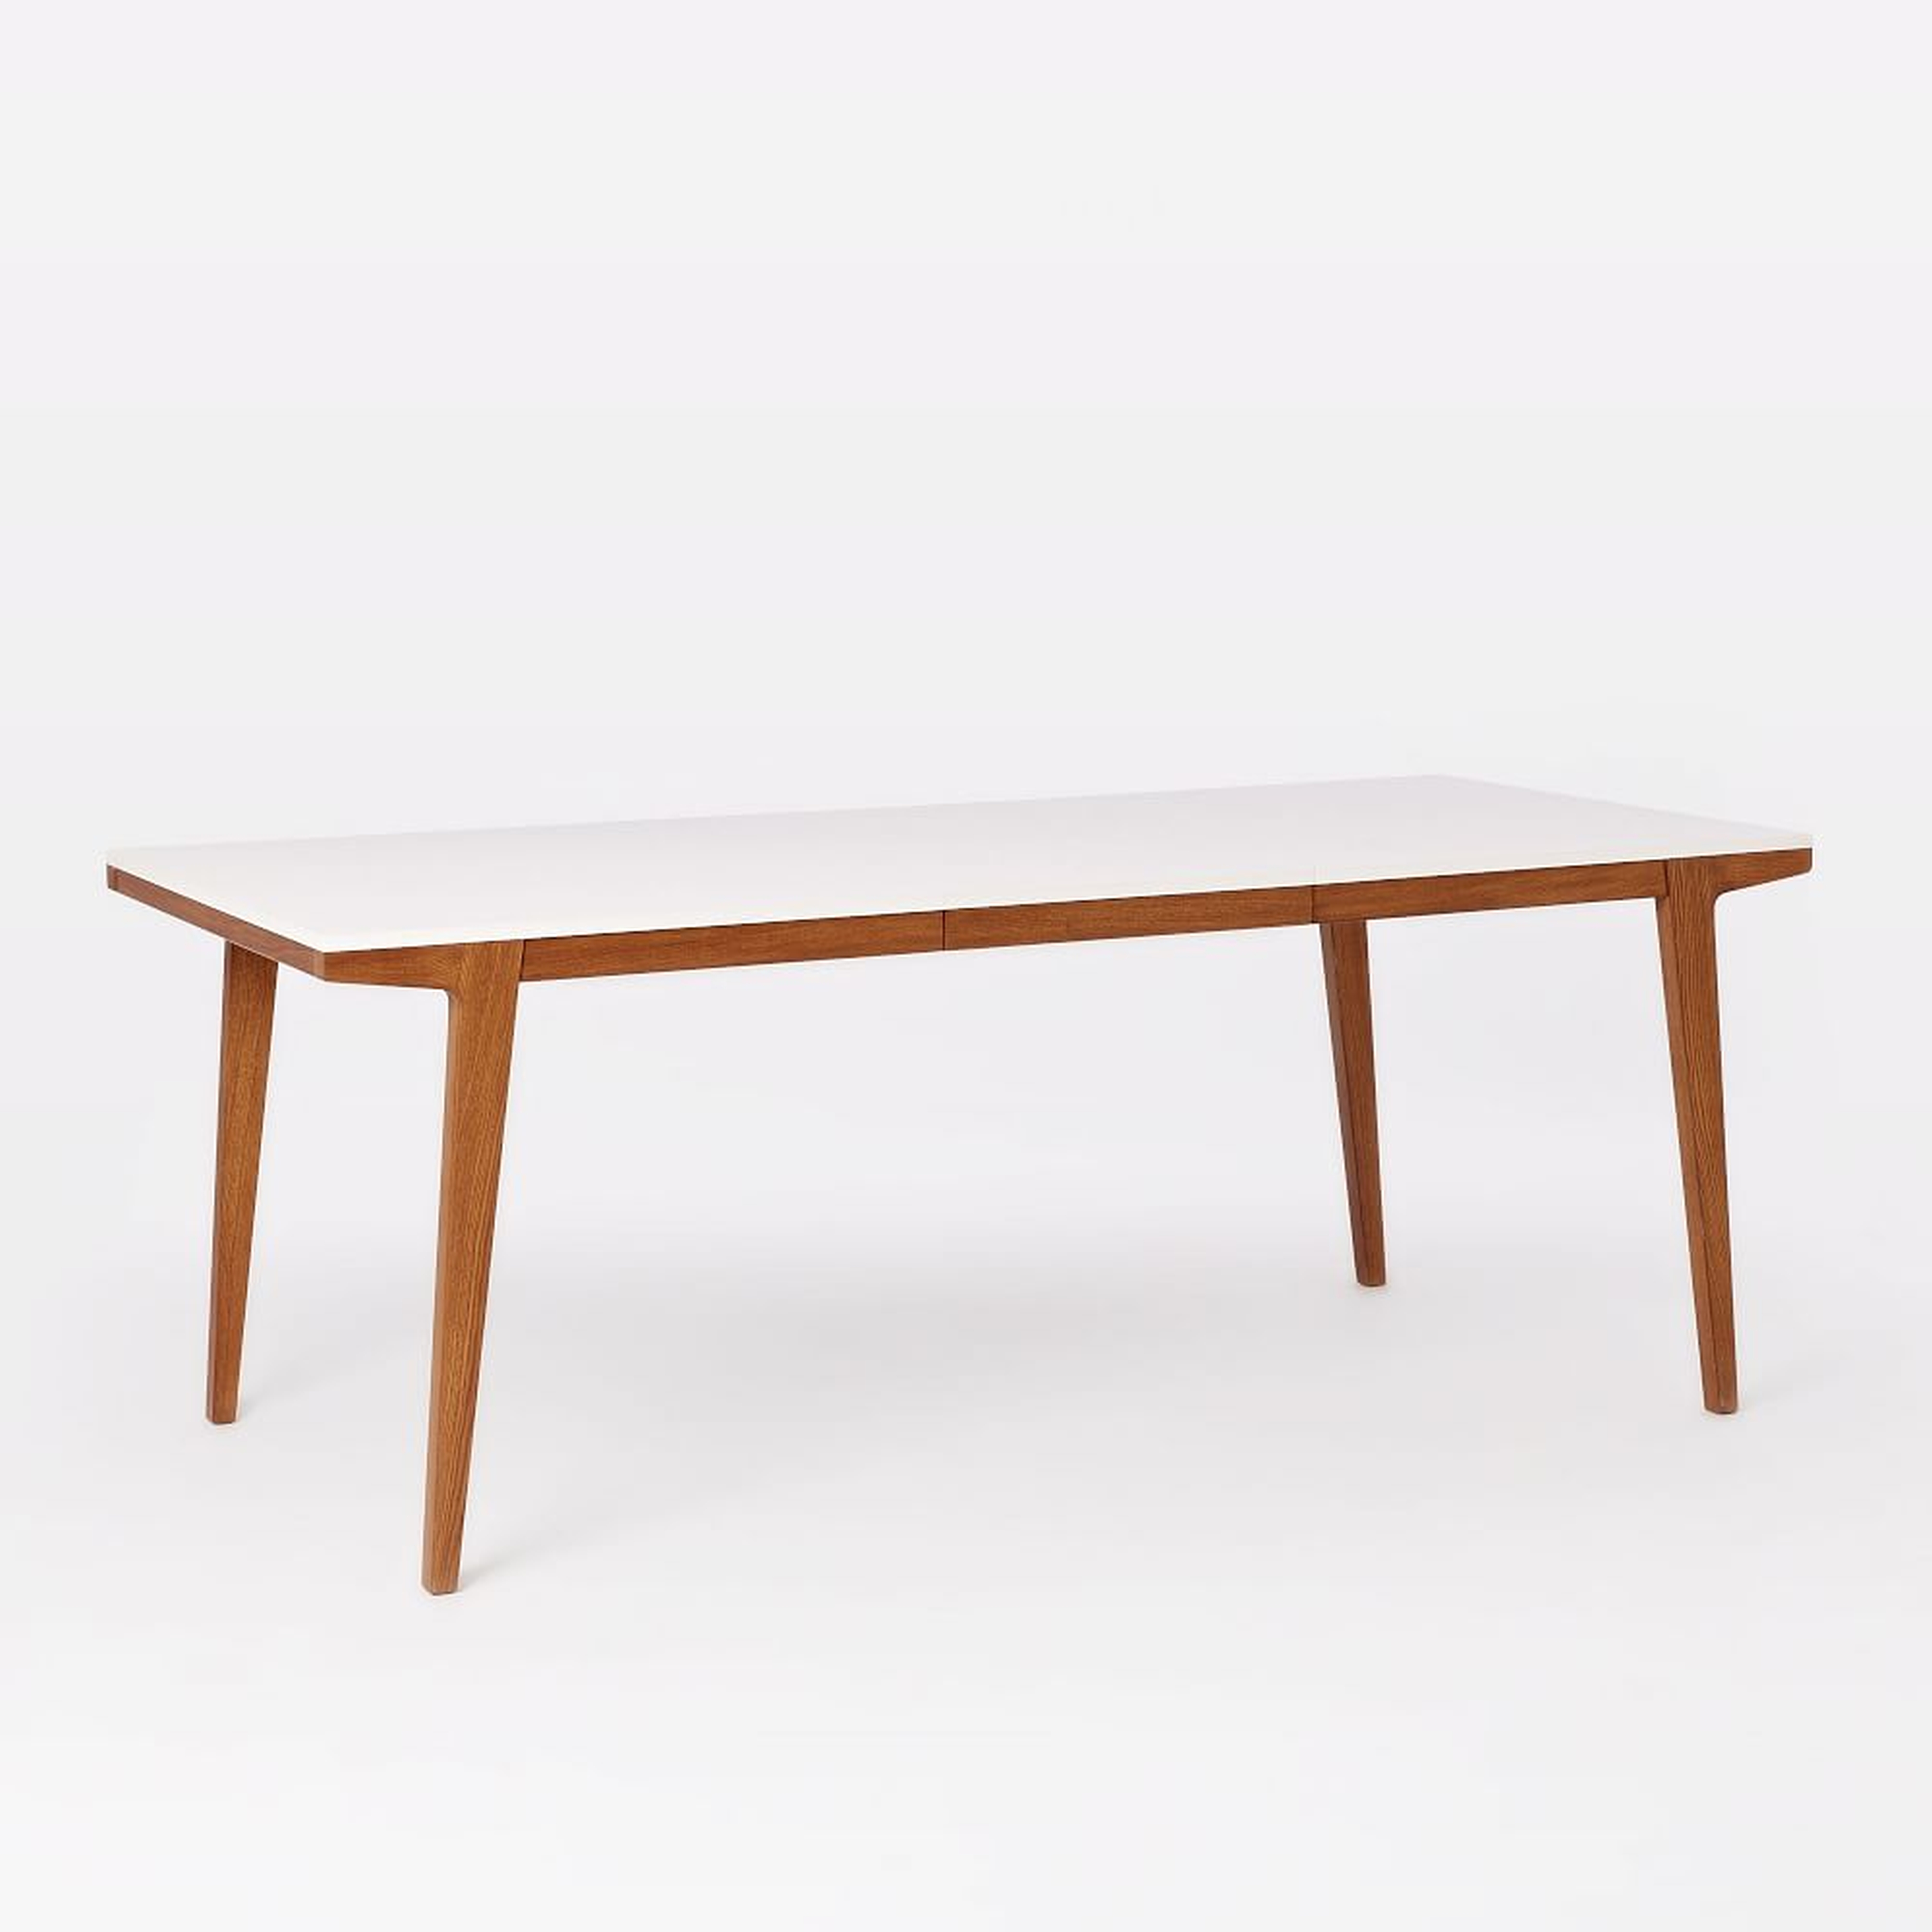 Modern Expandable Dining Table, 60-80", White Lacquer, Pecan - West Elm